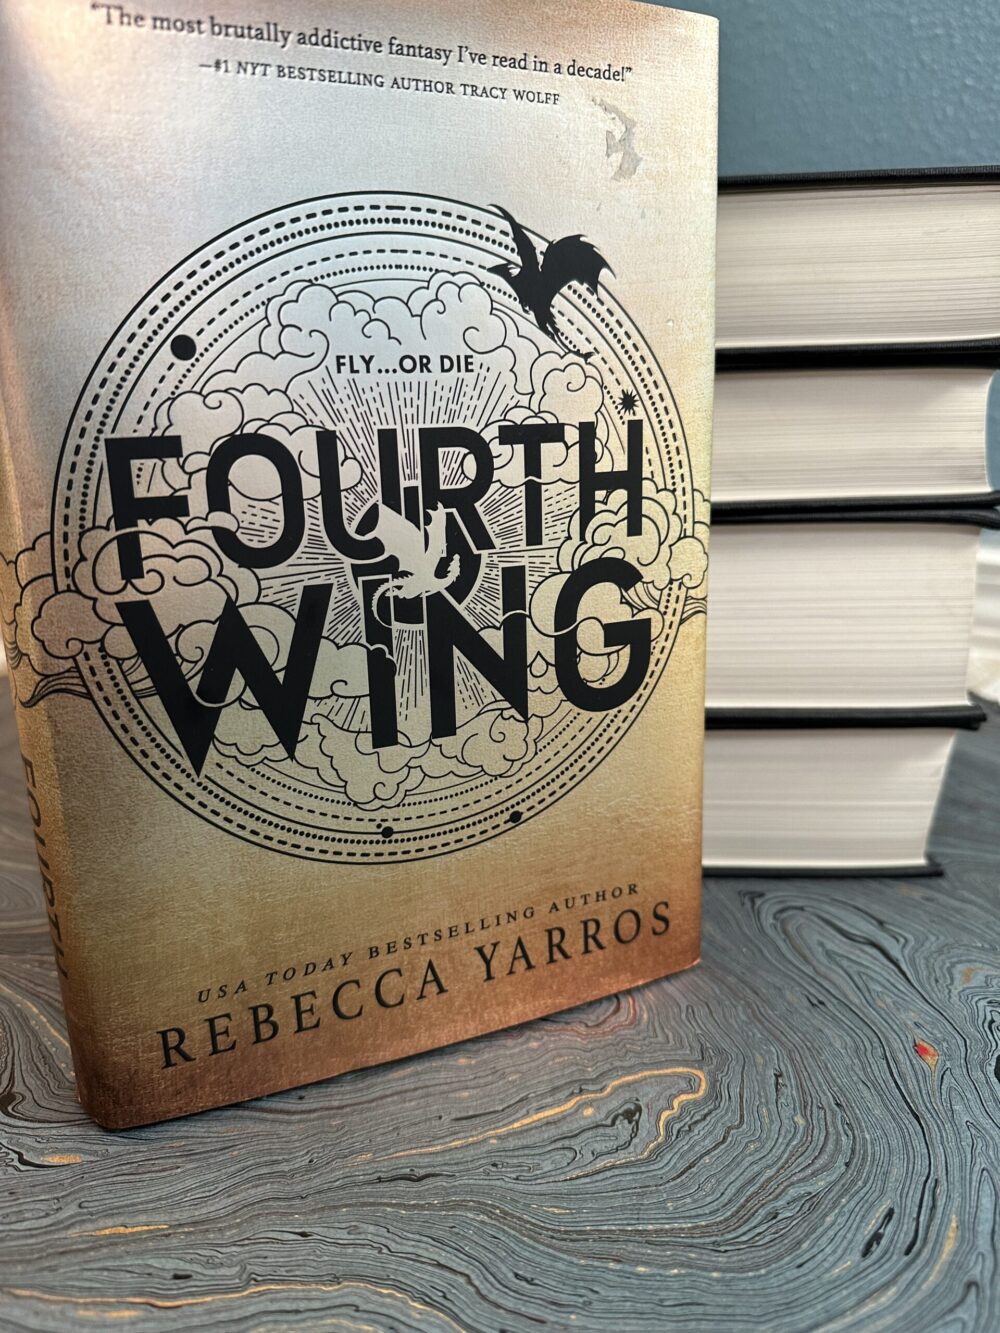 Fourth Wing Book and Book Stack